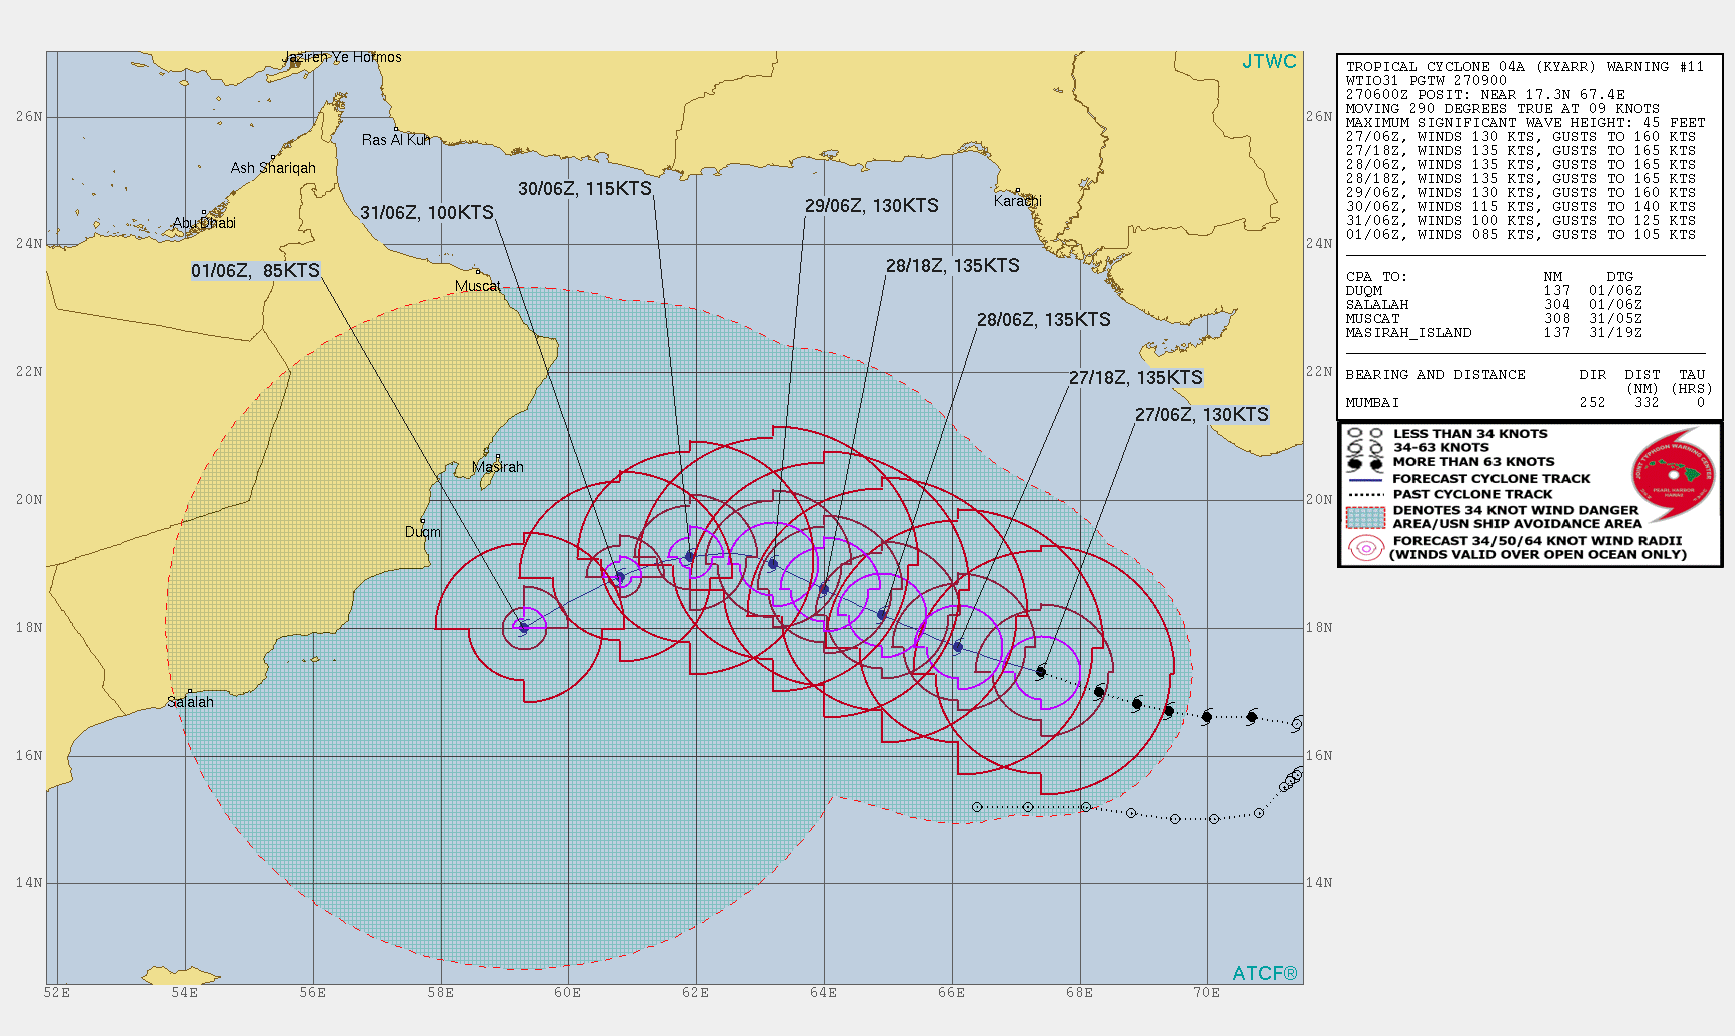 FORECAST PEAK INTENSITY: BODERLINE CATEGORY 4/5 WITHIN THE NEXT 36H